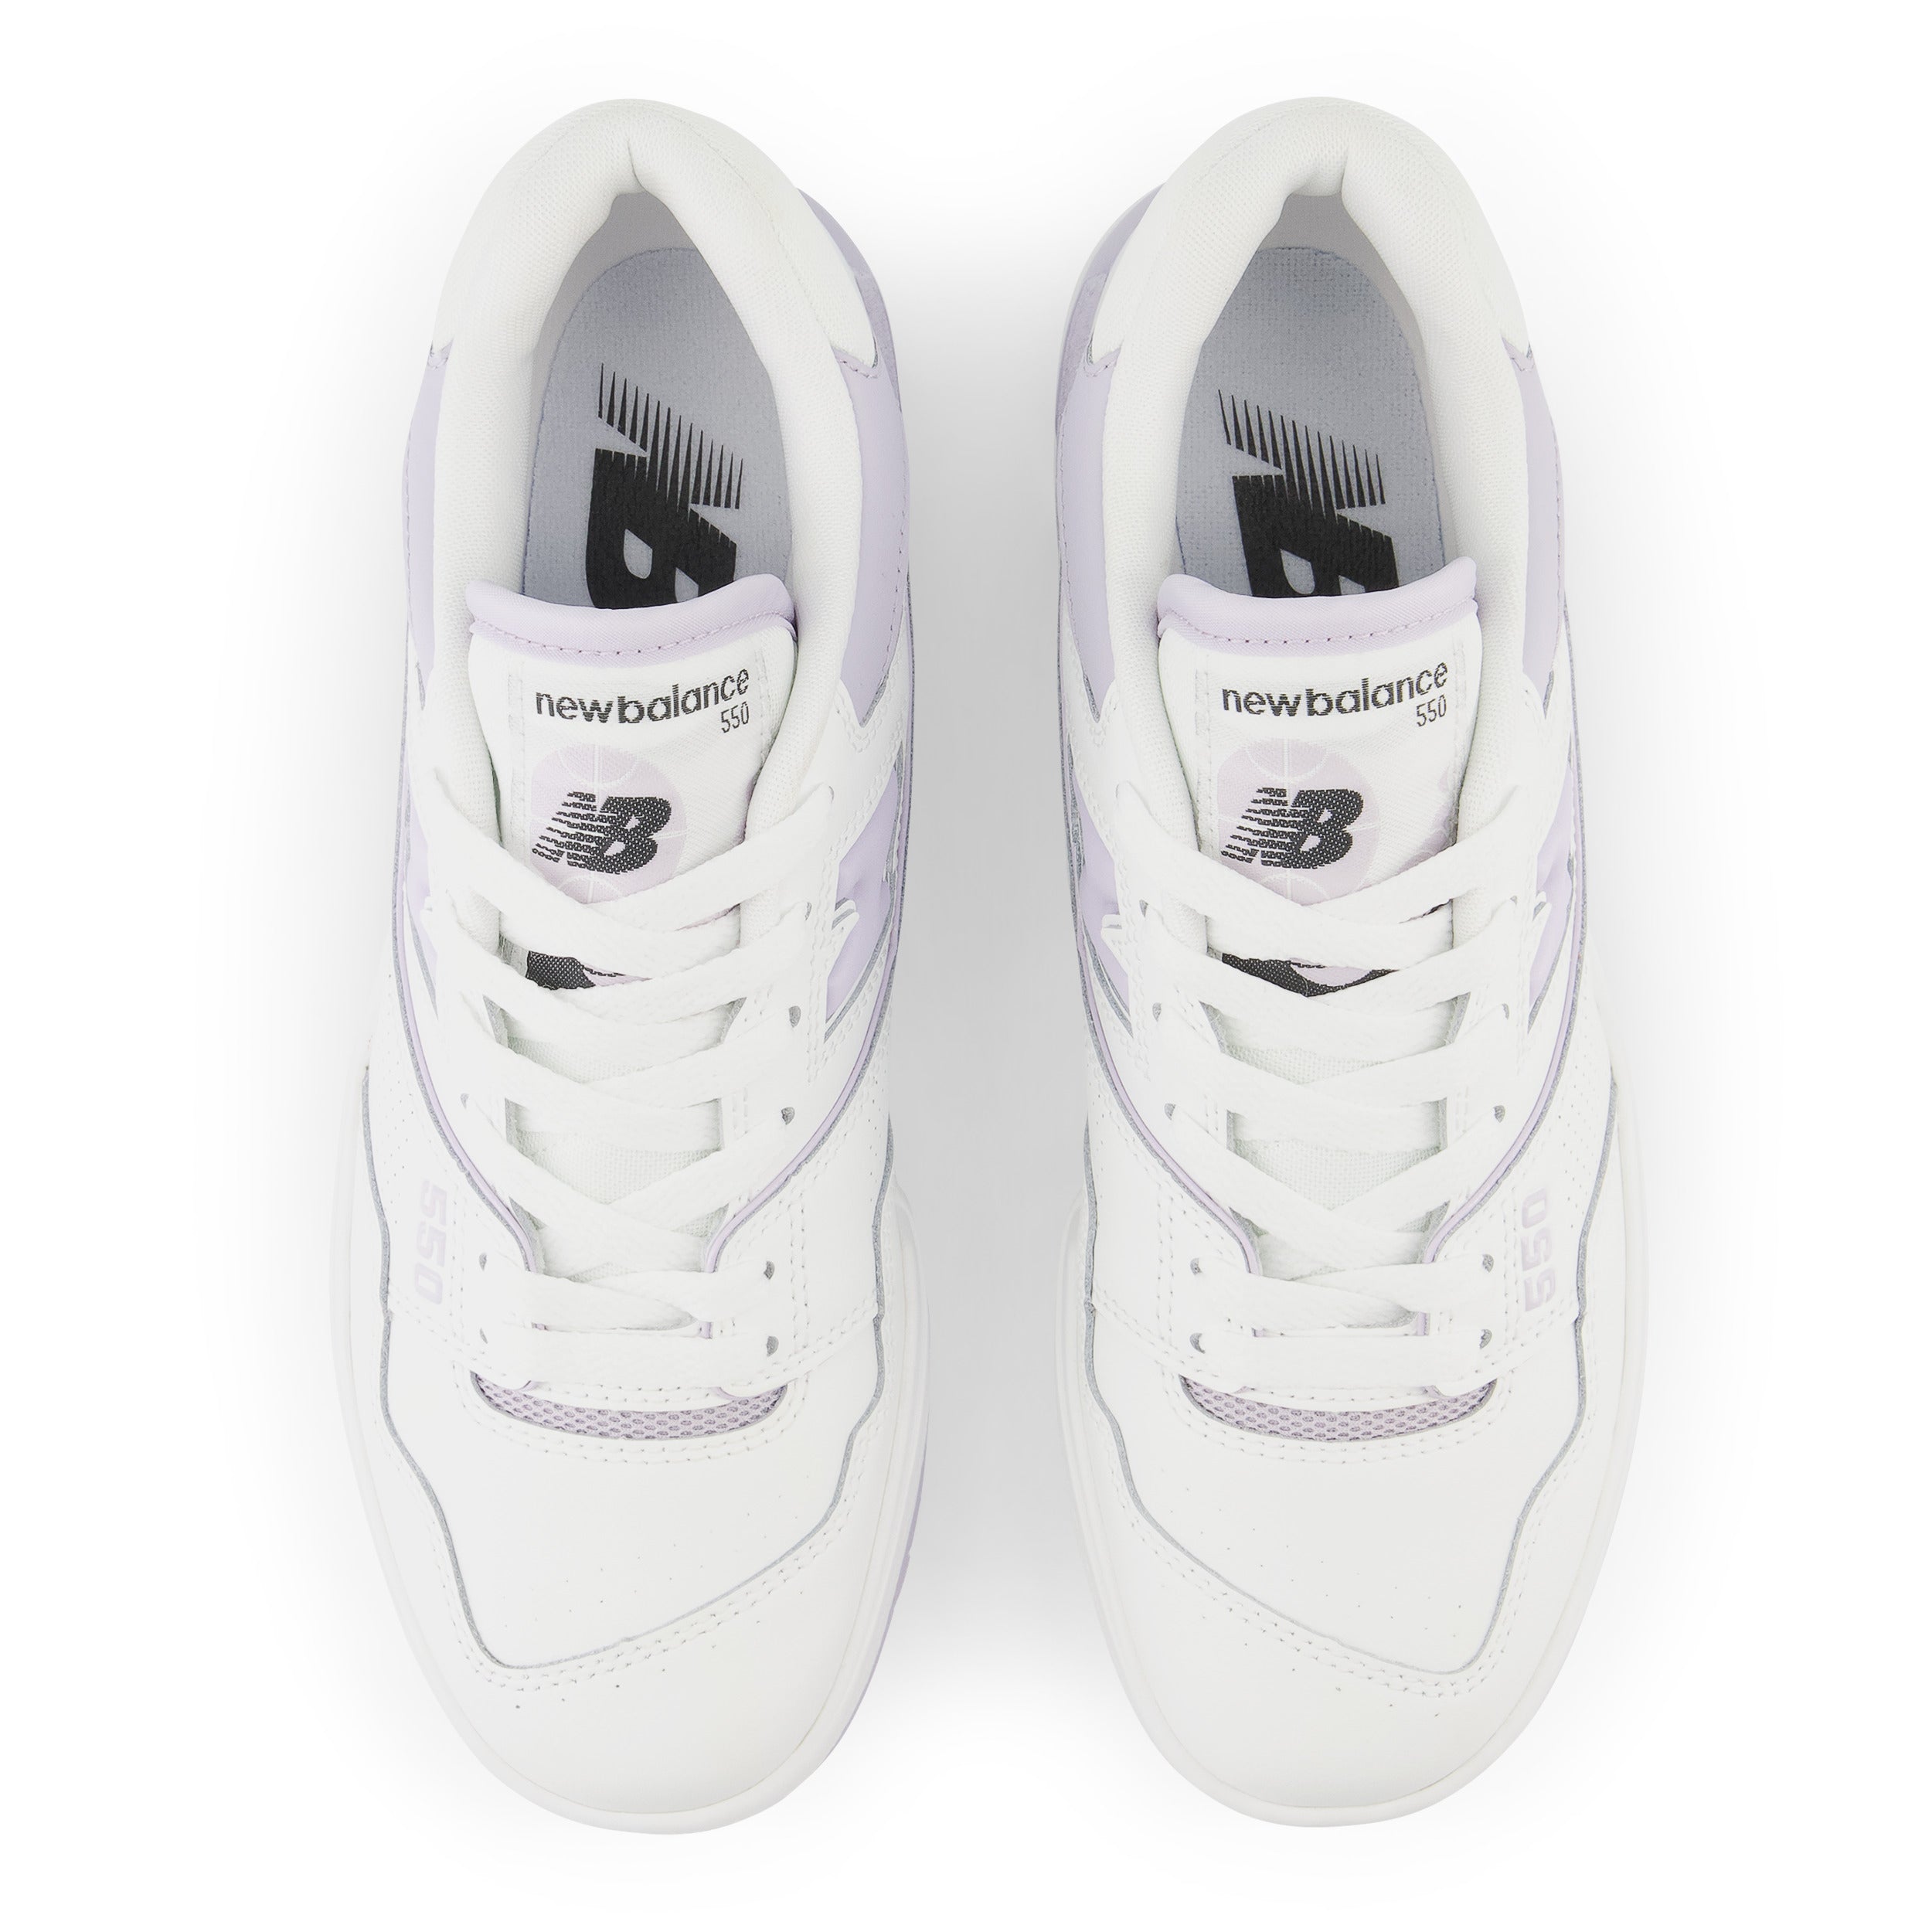 NEW BALANCE-Sneakers Donna 550-White/Grey Violet